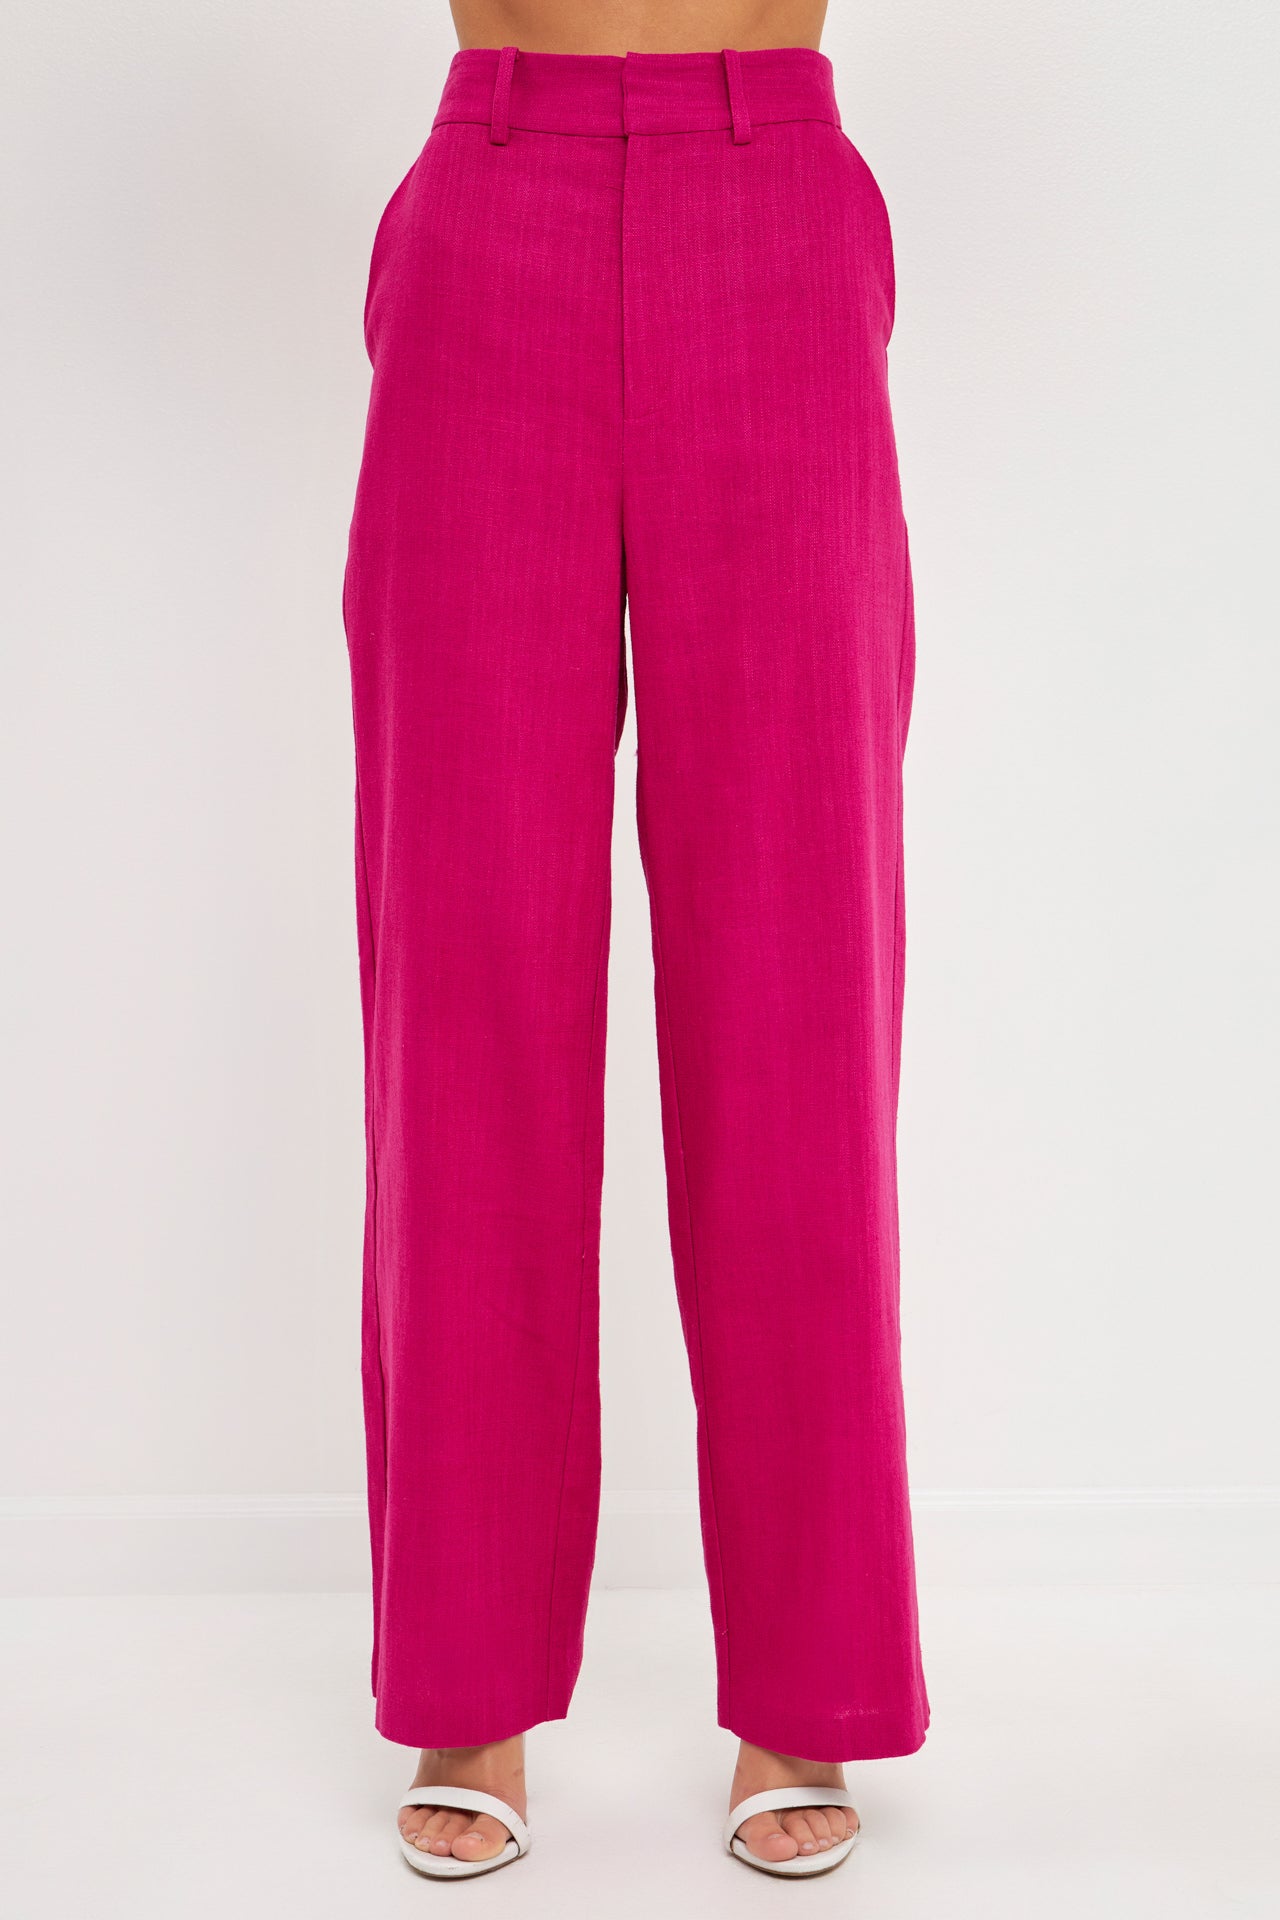 ENDLESS ROSE - Wide Leg Linen Pants - PANTS available at Objectrare